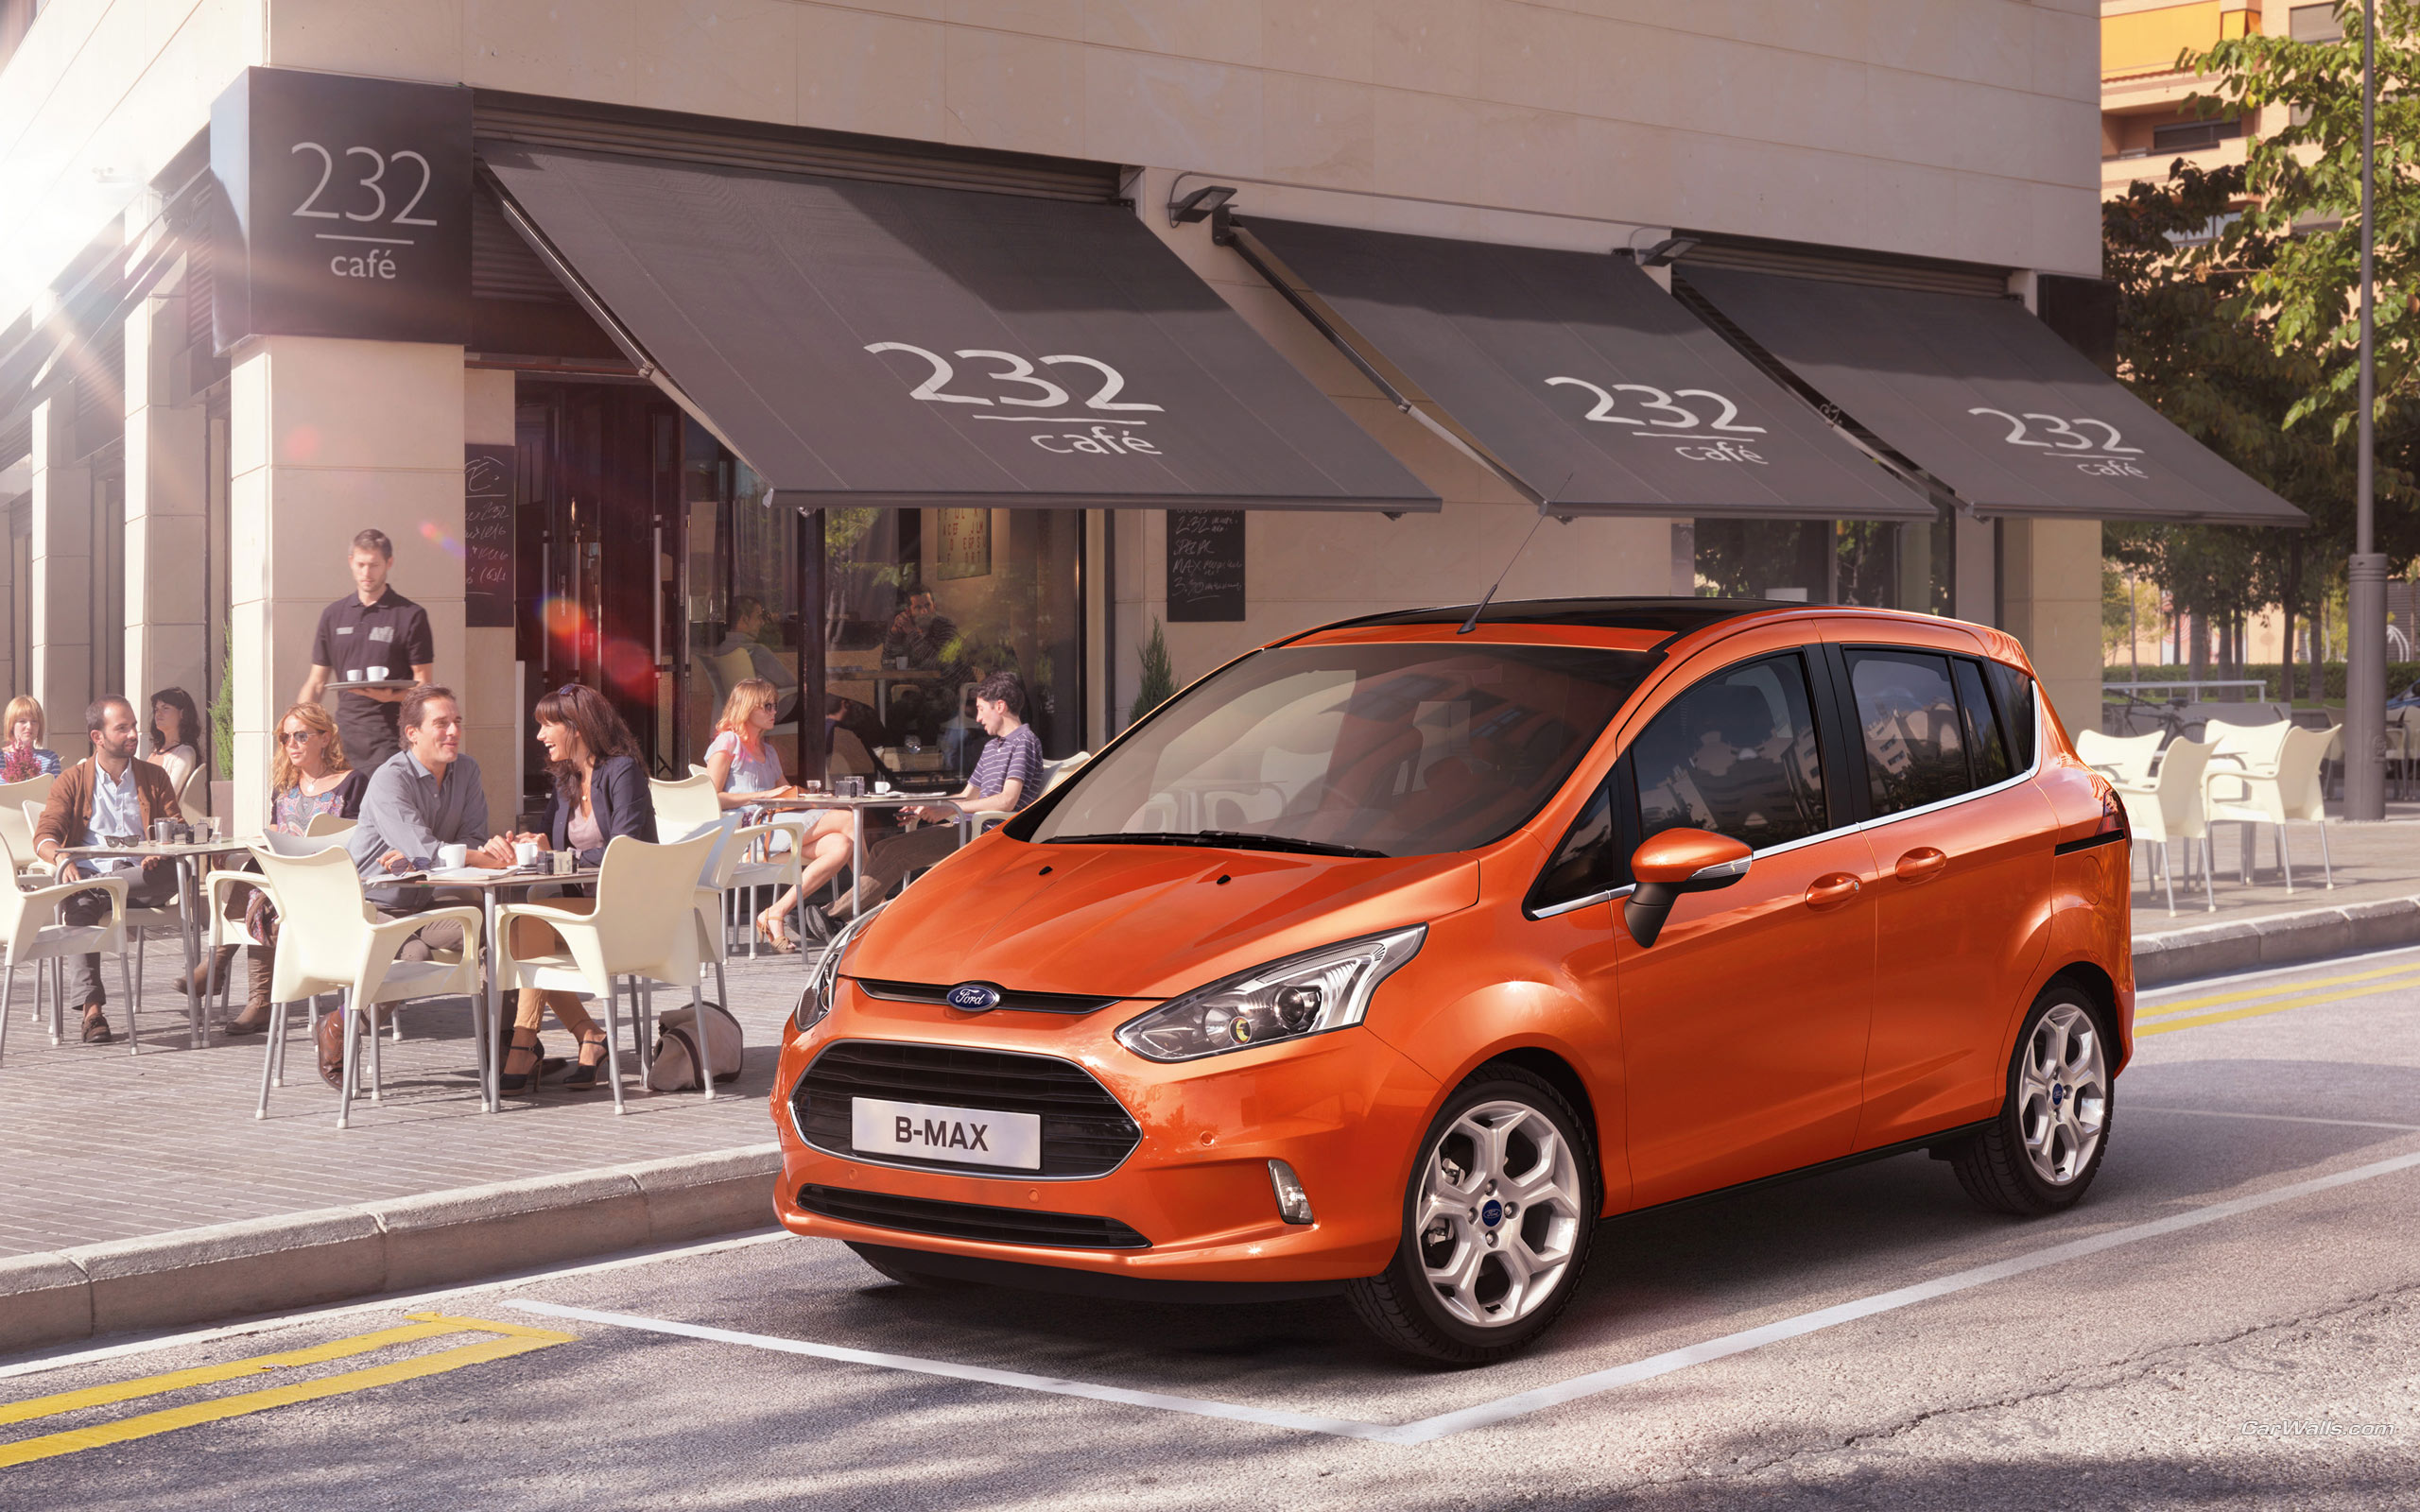 Vehicles 2013 Ford B-Max HD Wallpaper | Background Image